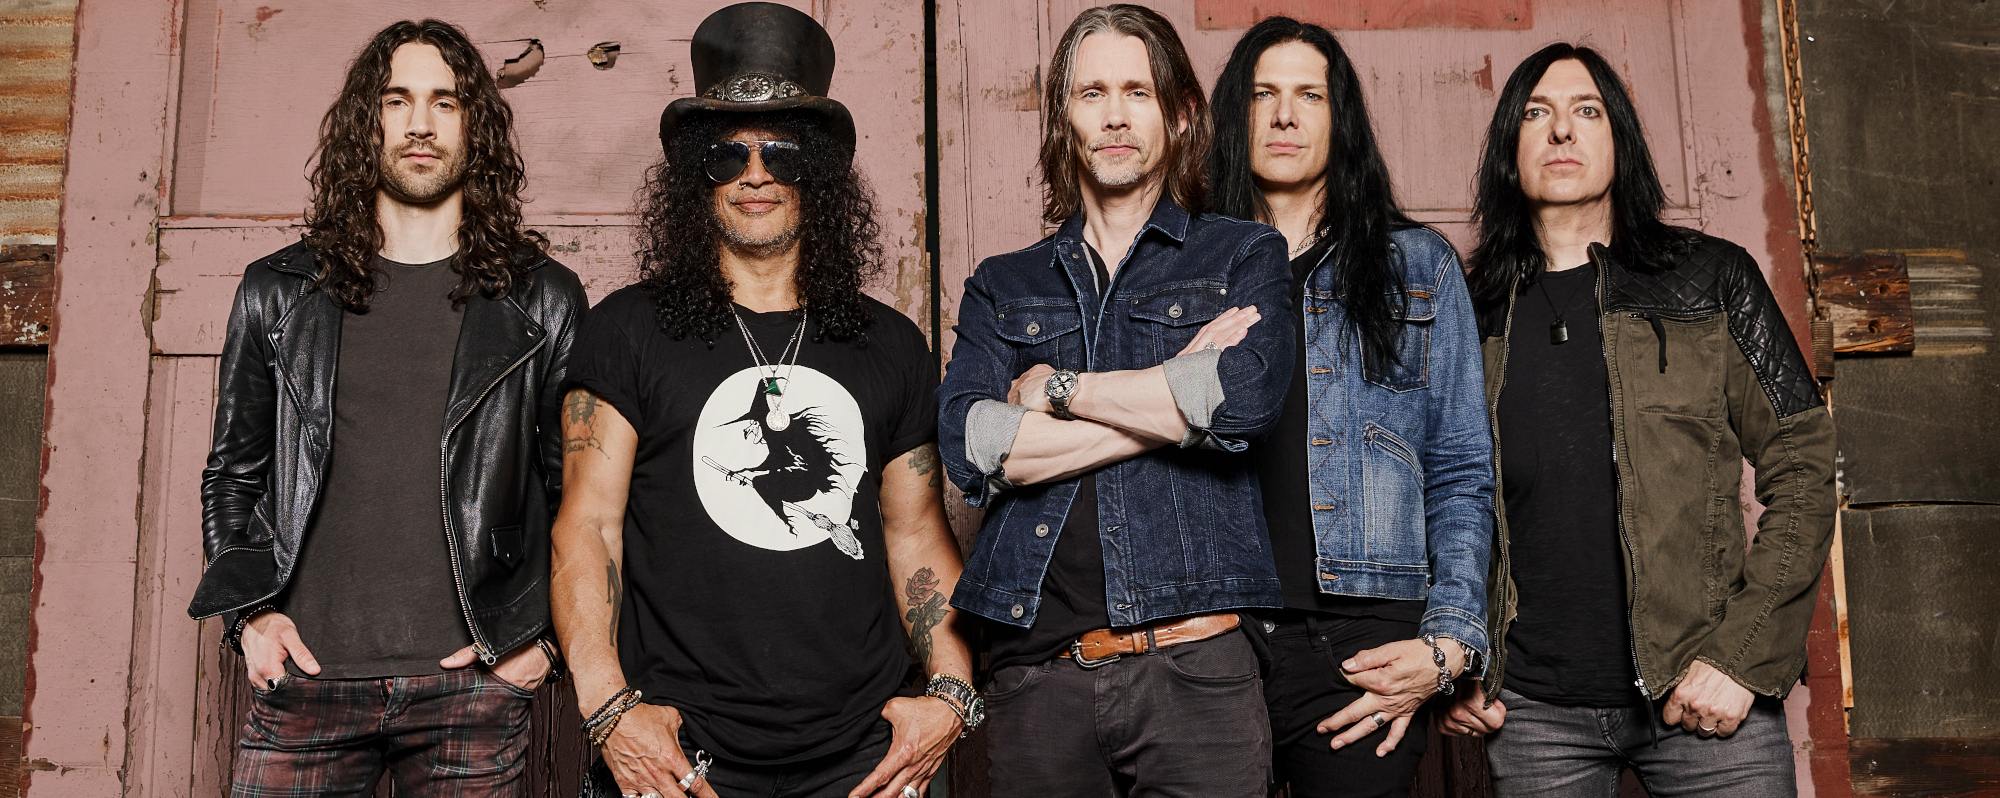 Slash Featuring Myles Kennedy & The Conspirators: ‘4’ Times the Charm